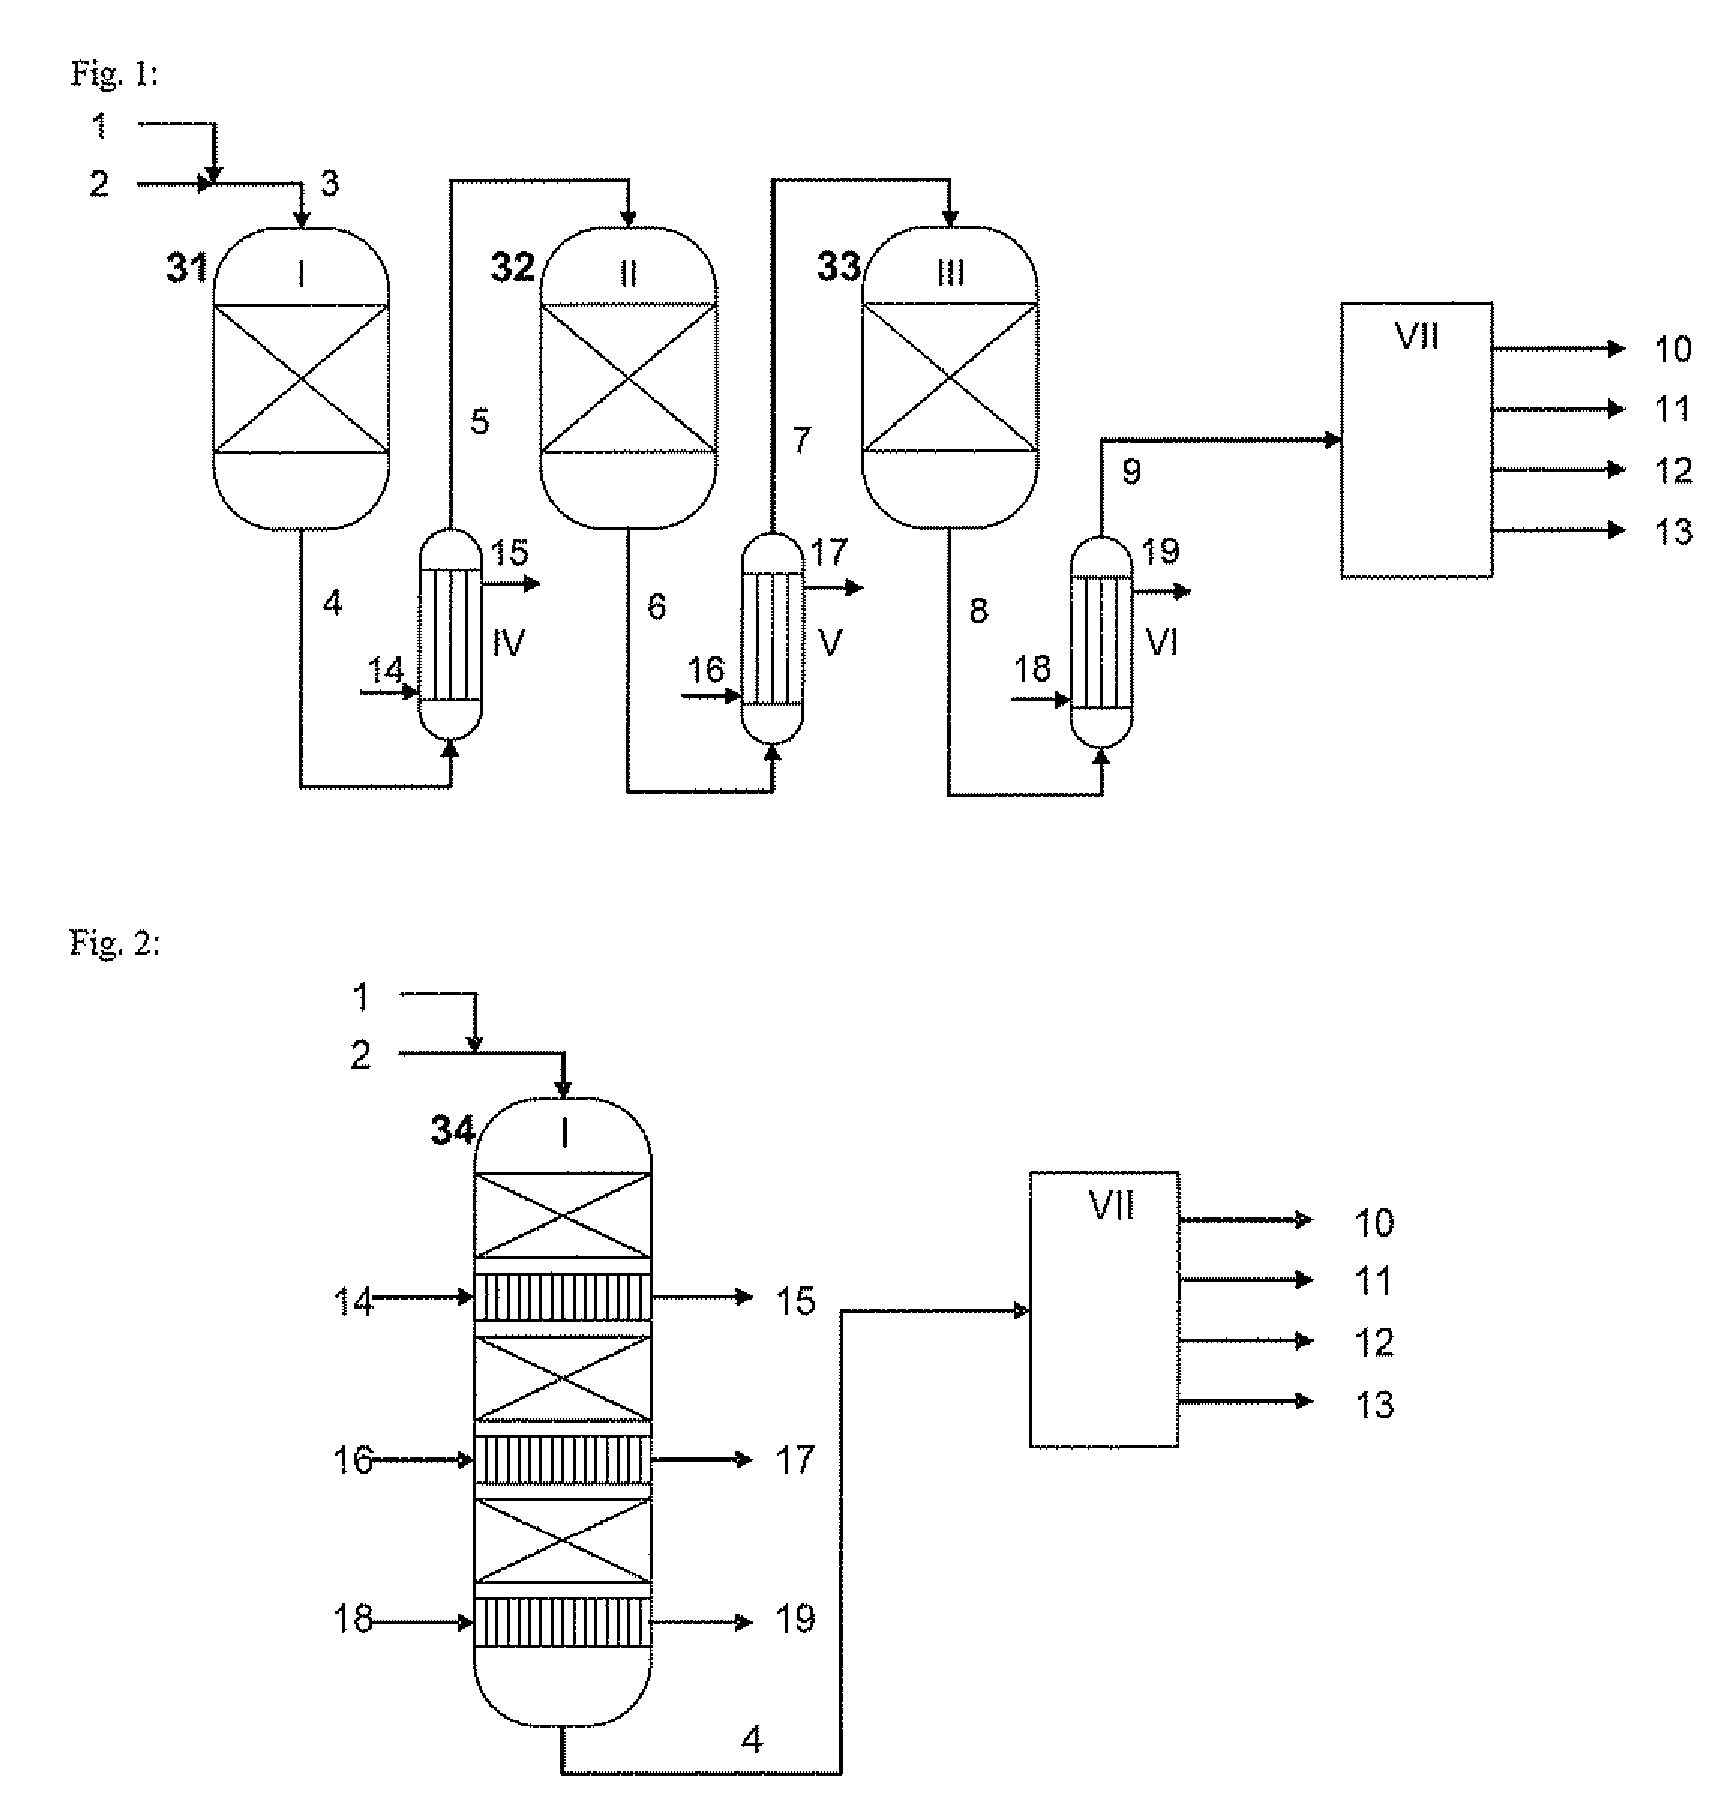 Processes and apparatus for the production of chlorine by gas phase oxidation